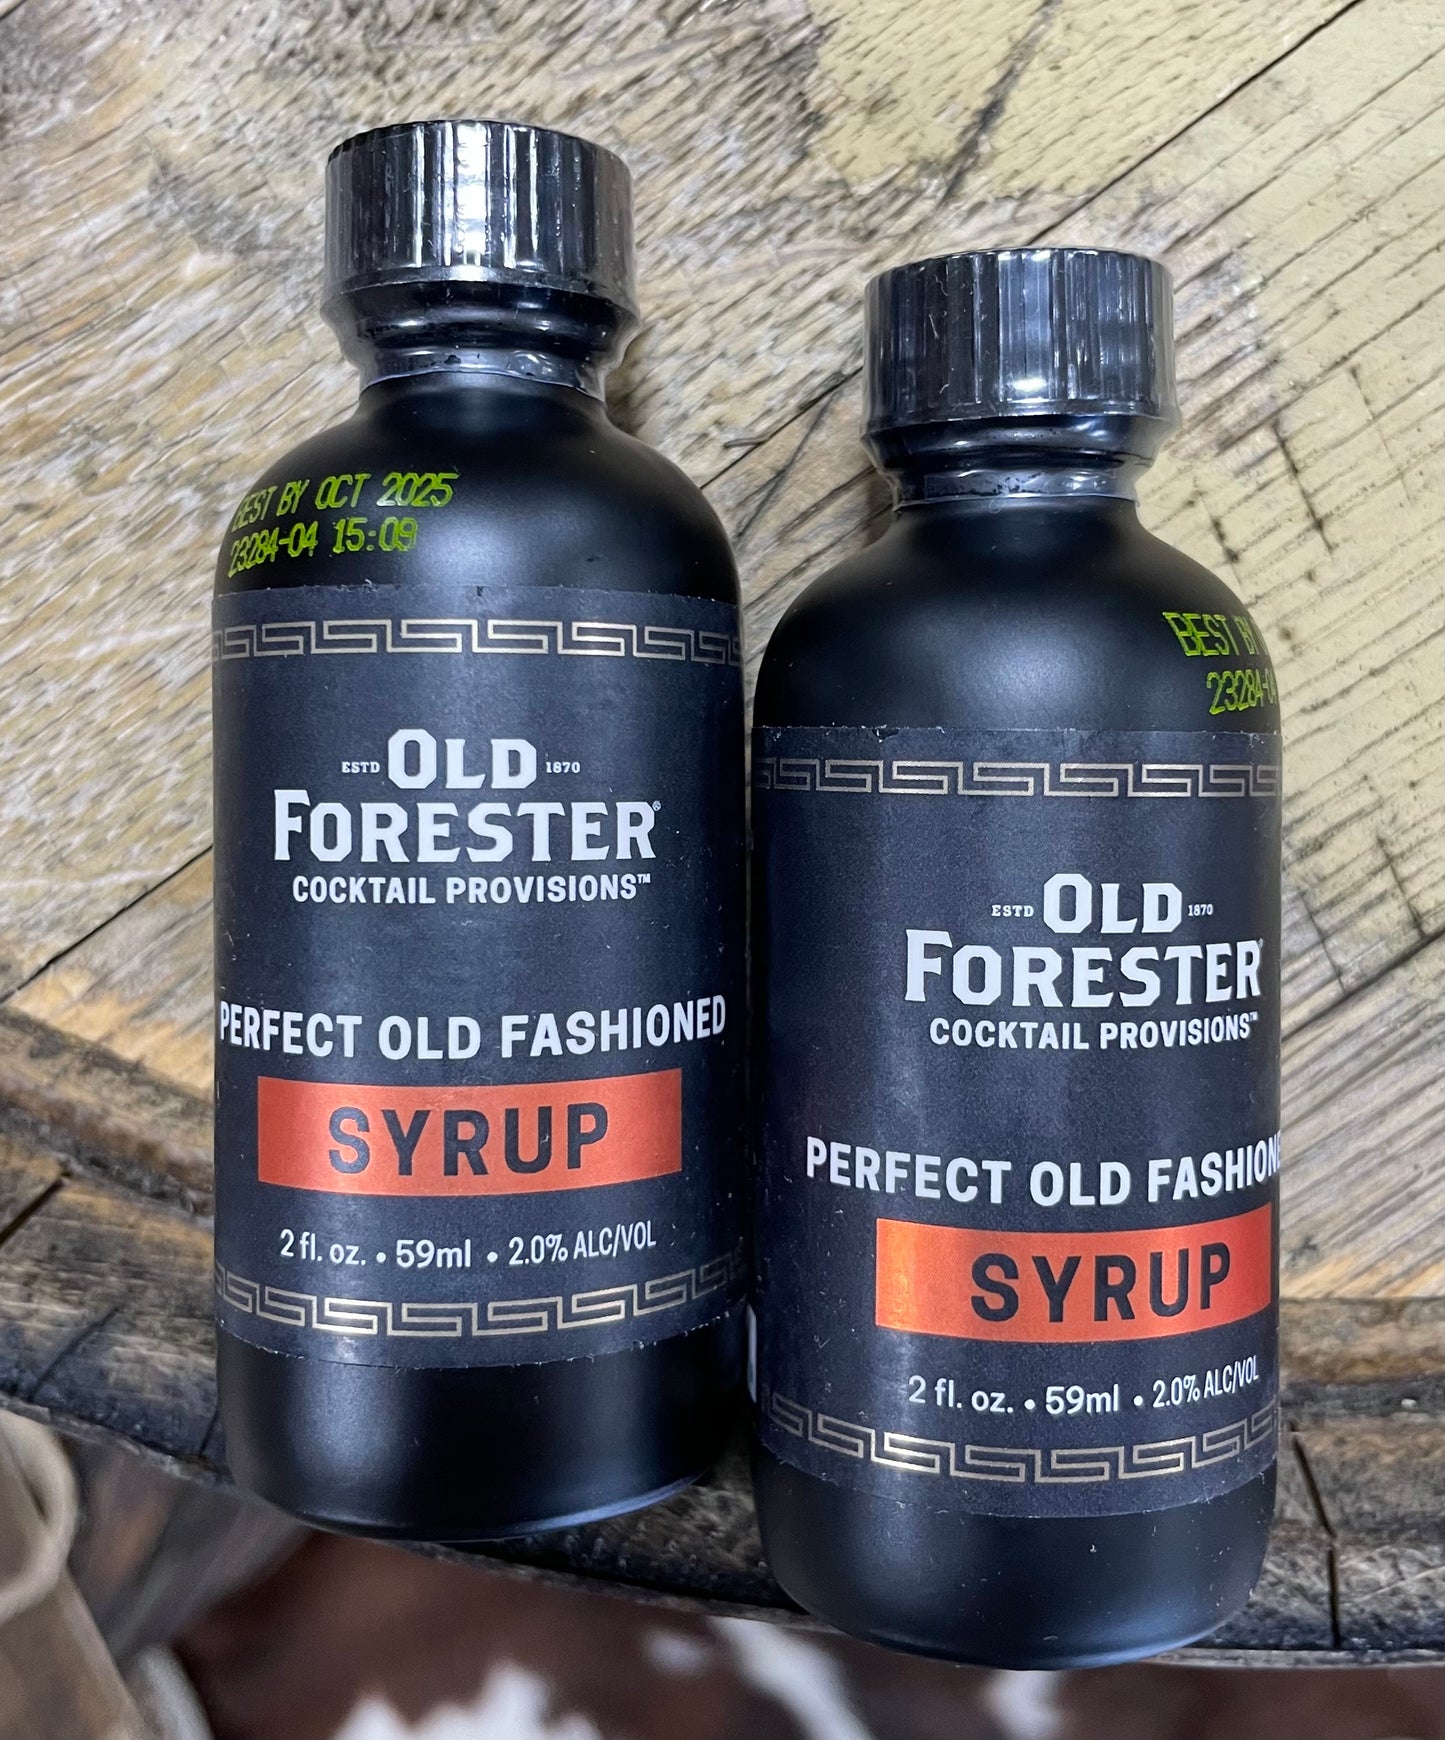 Old Forester- Old Fashioned Syrup